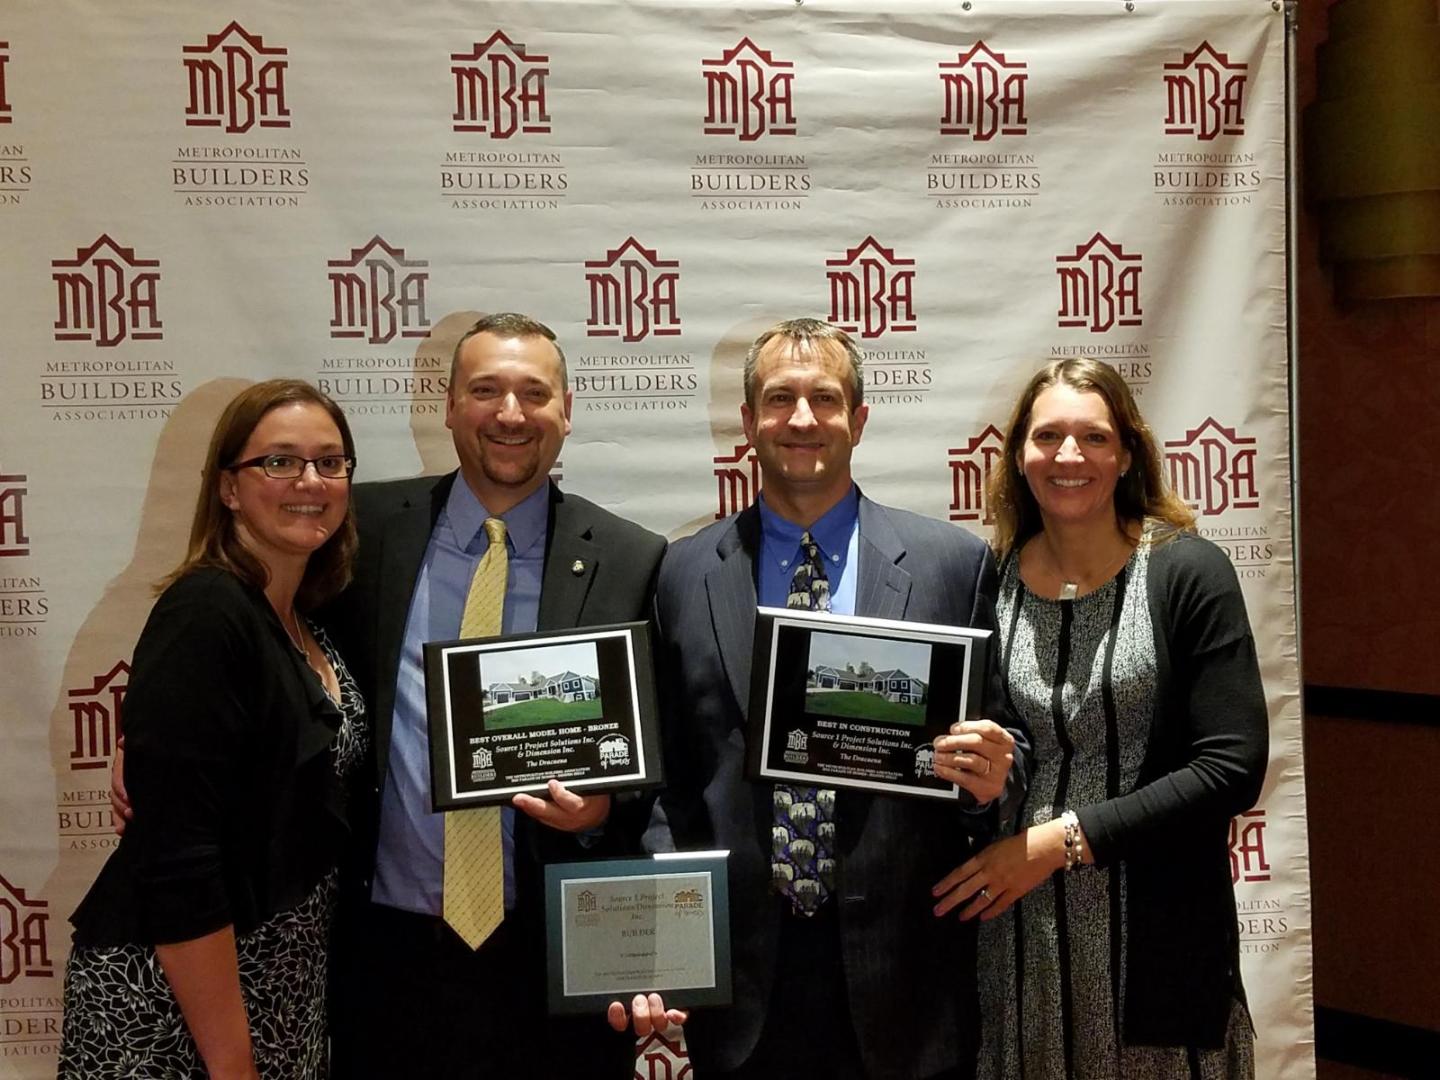 Best Overall Model Home - Bronze and Best In Construction